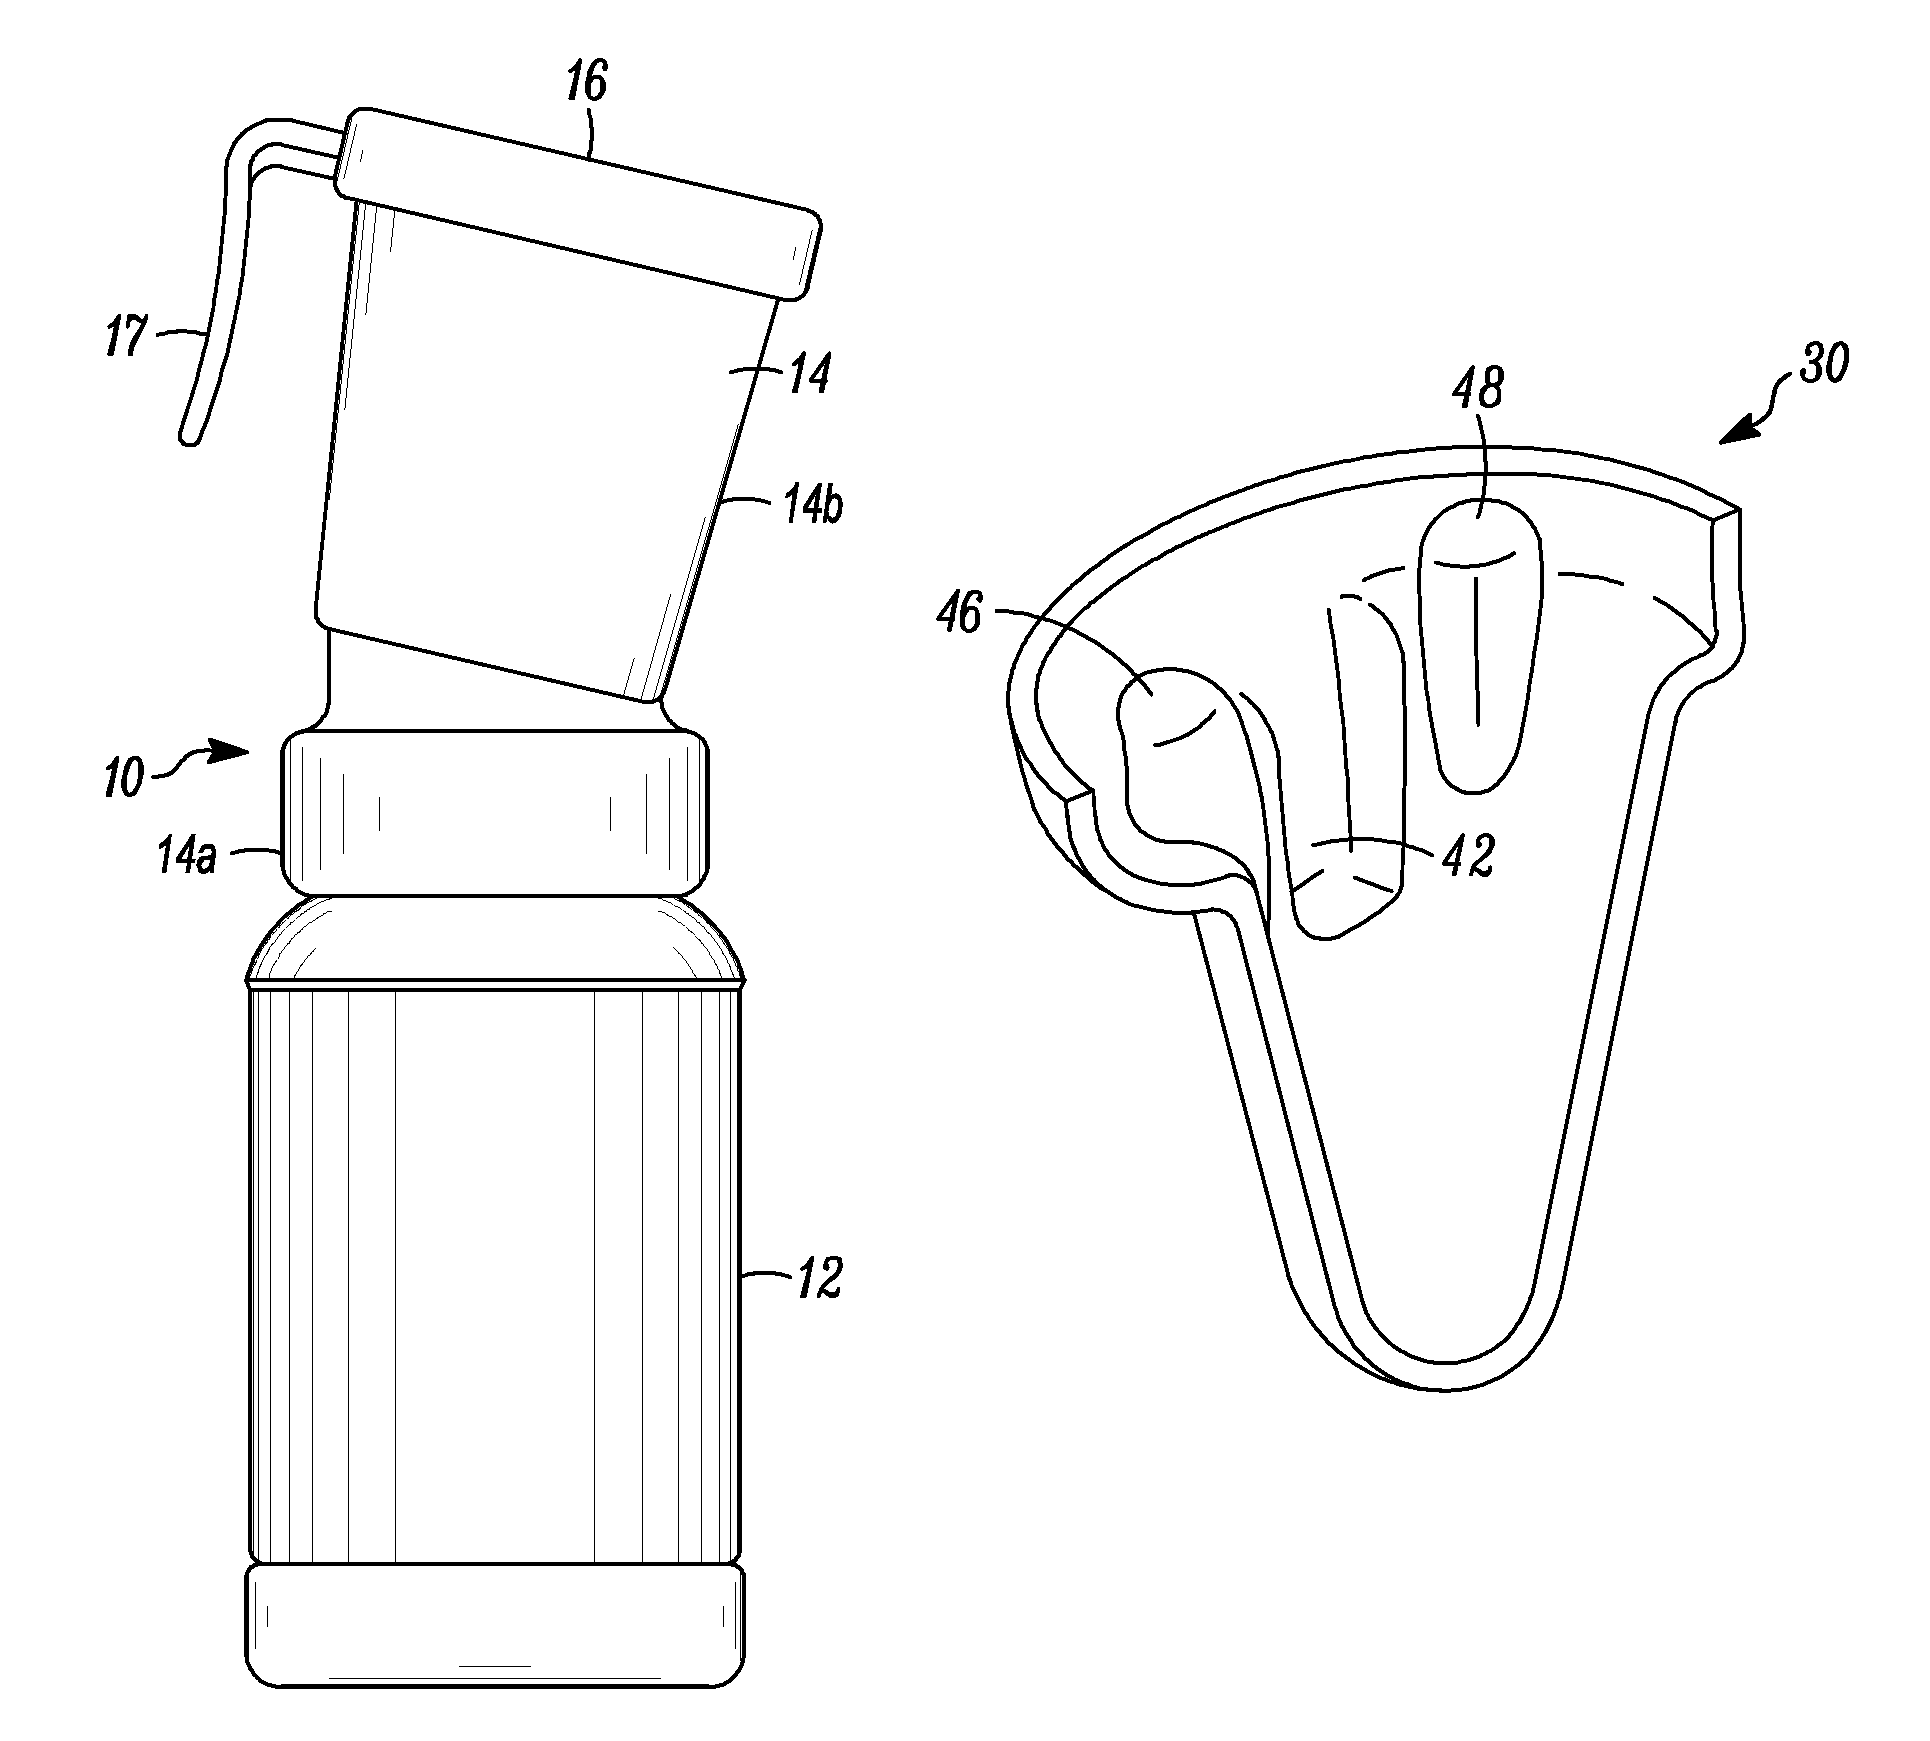 Teat application device with cup portion having limited circumferential extension